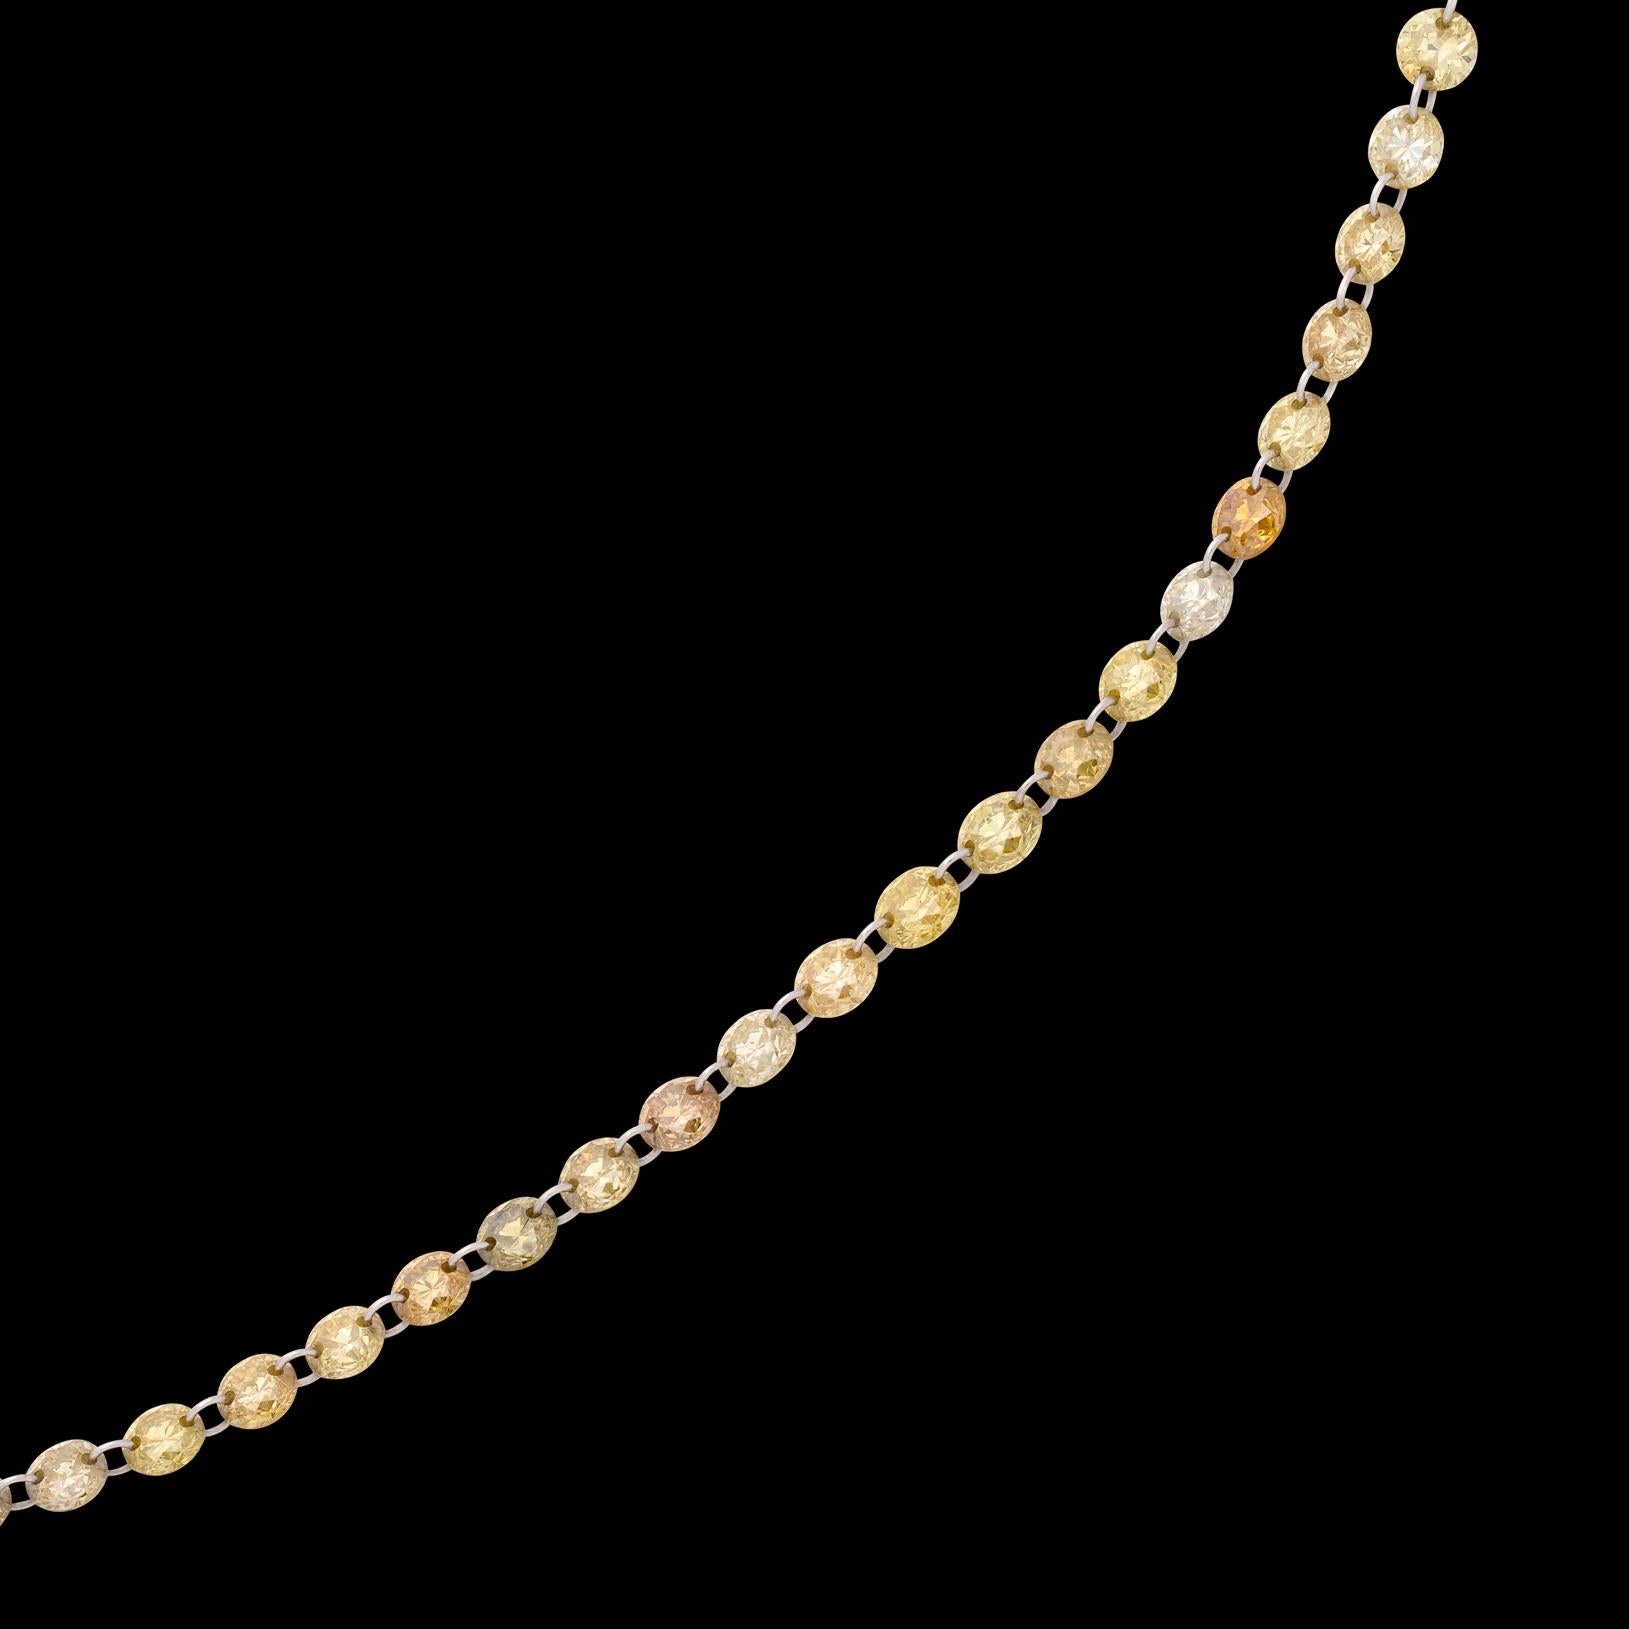 For the lover of the finer things! This beautiful necklace features 7.44 carats of fine Yellow, White and Champagne colored natural diamonds delivering an eye catching look with a variety of rare stones. The round cut diamonds have been expertly set